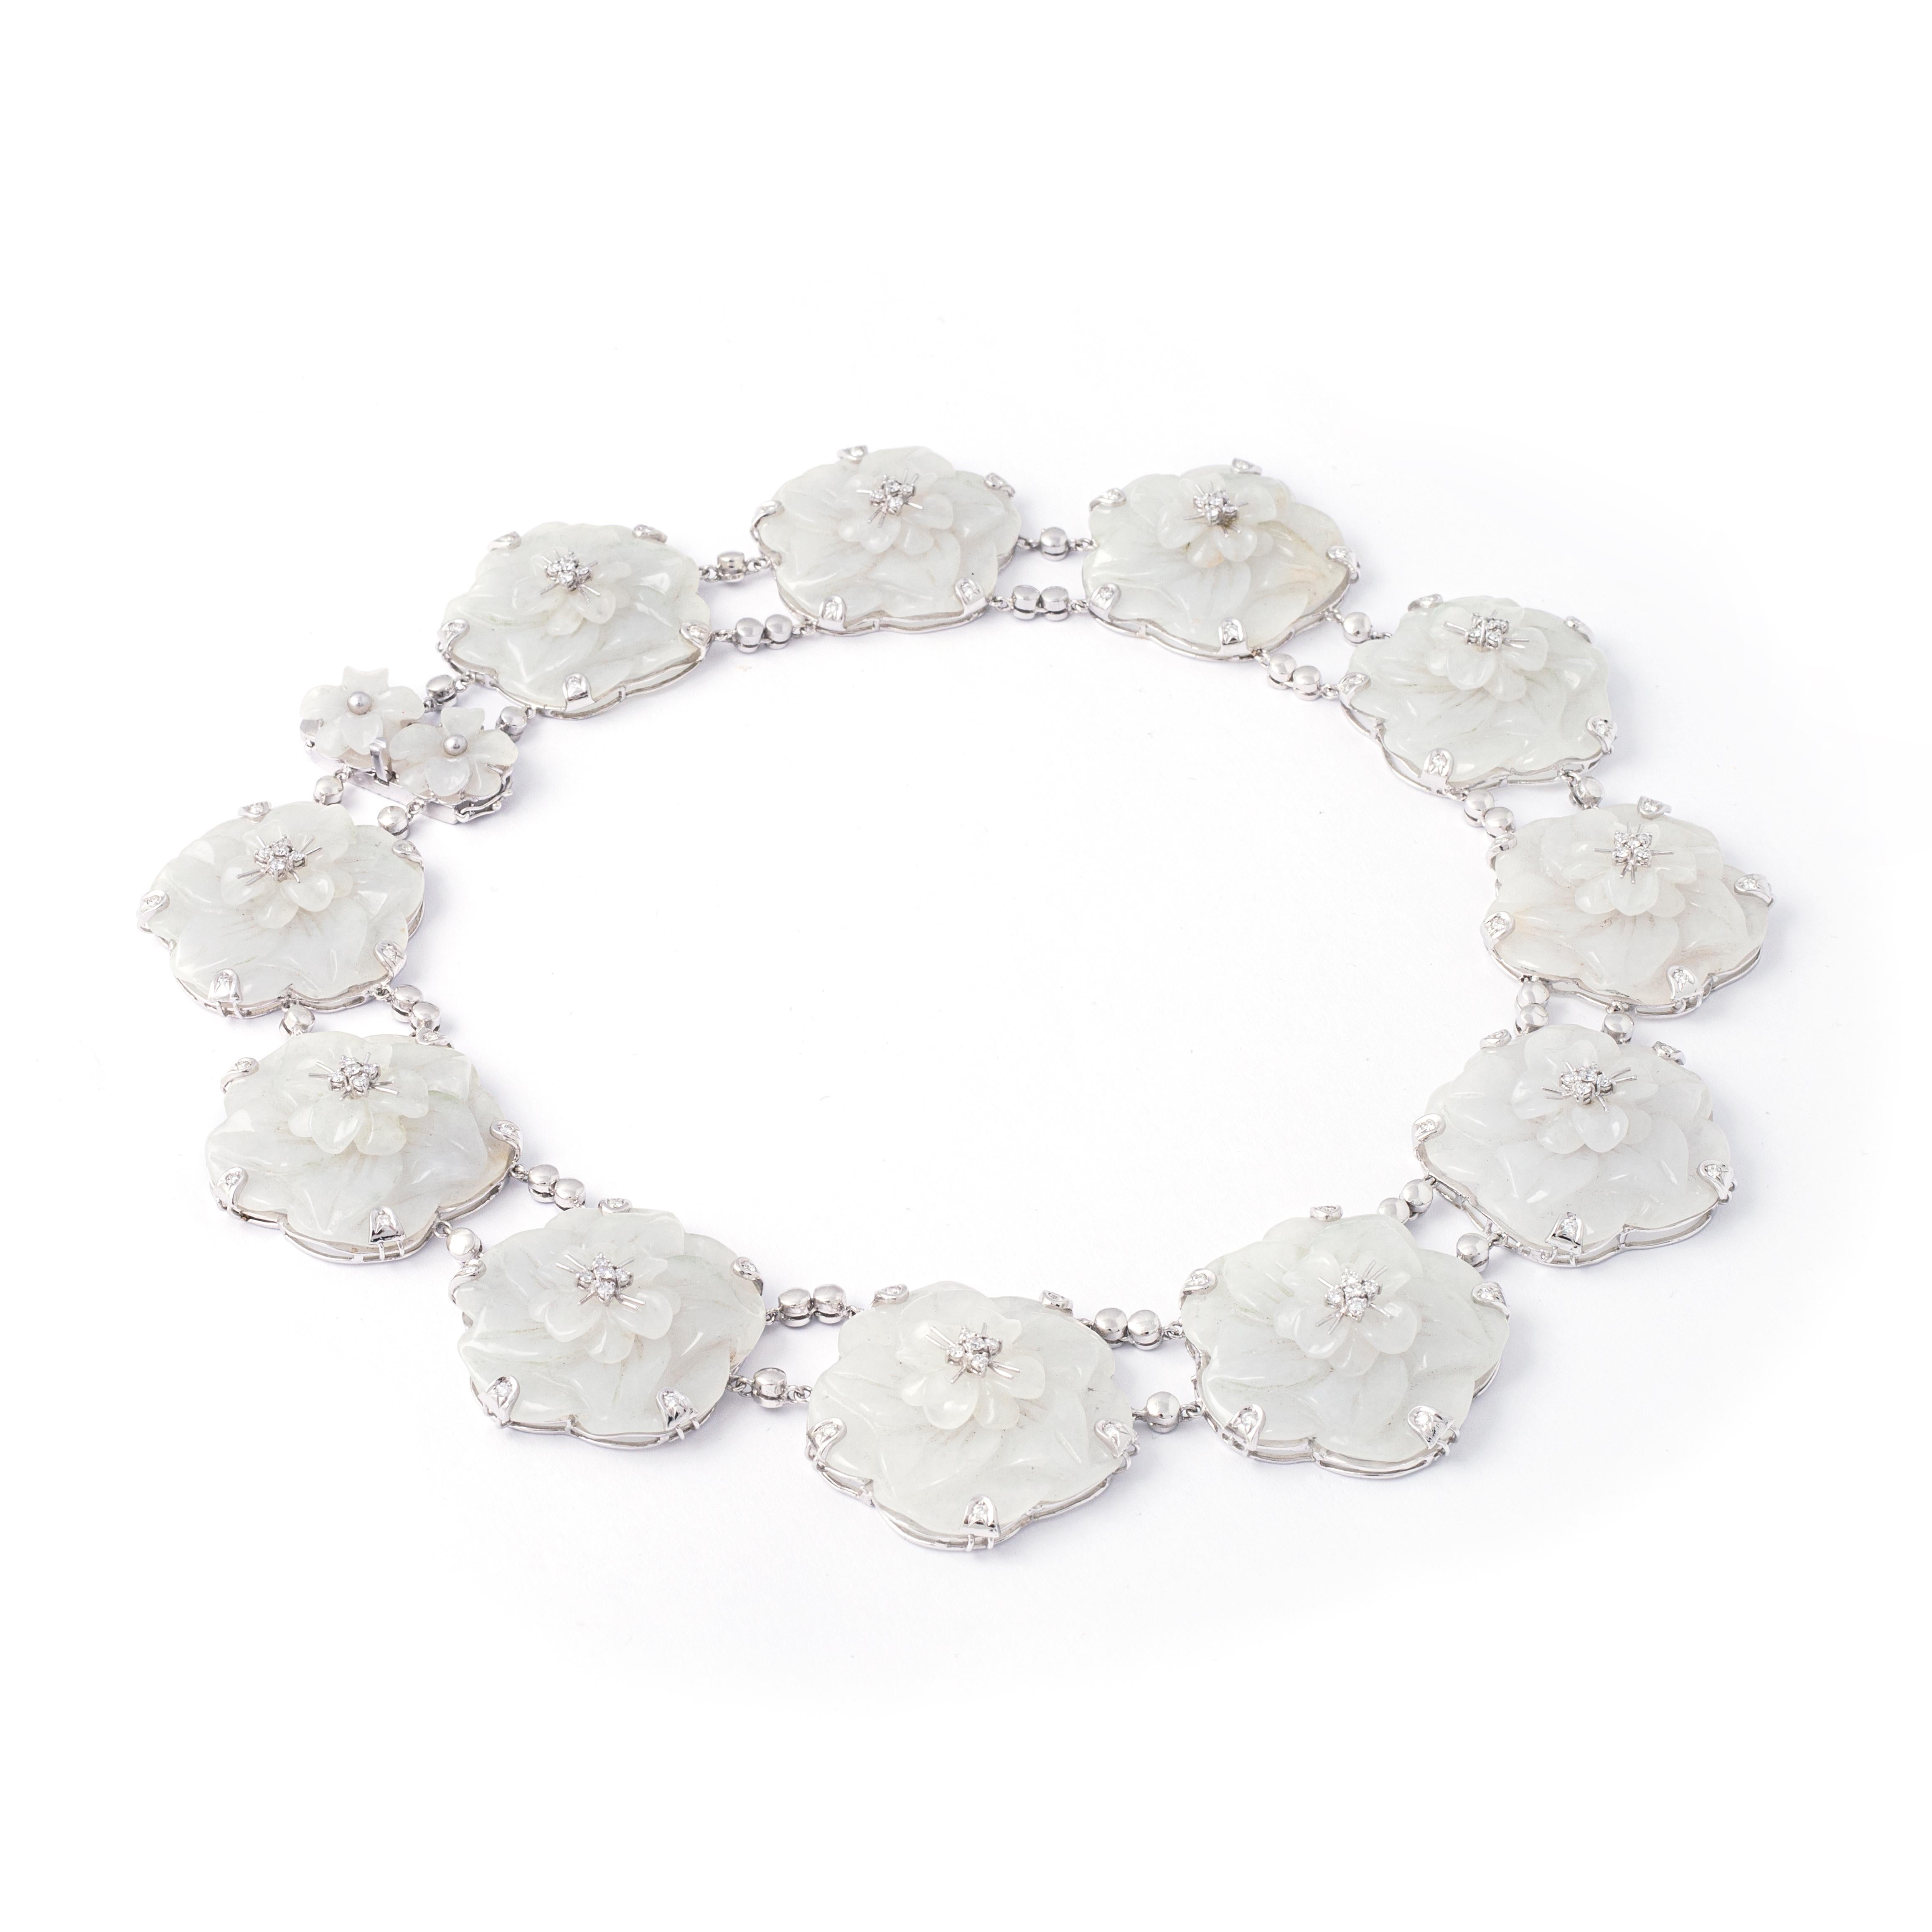 Flower Diamond, probably white jade (not tested) on white gold necklace. Contemporary work.

Total length: approx. 42.50 centimeters.
Width: approx. 3.30 centimeters.